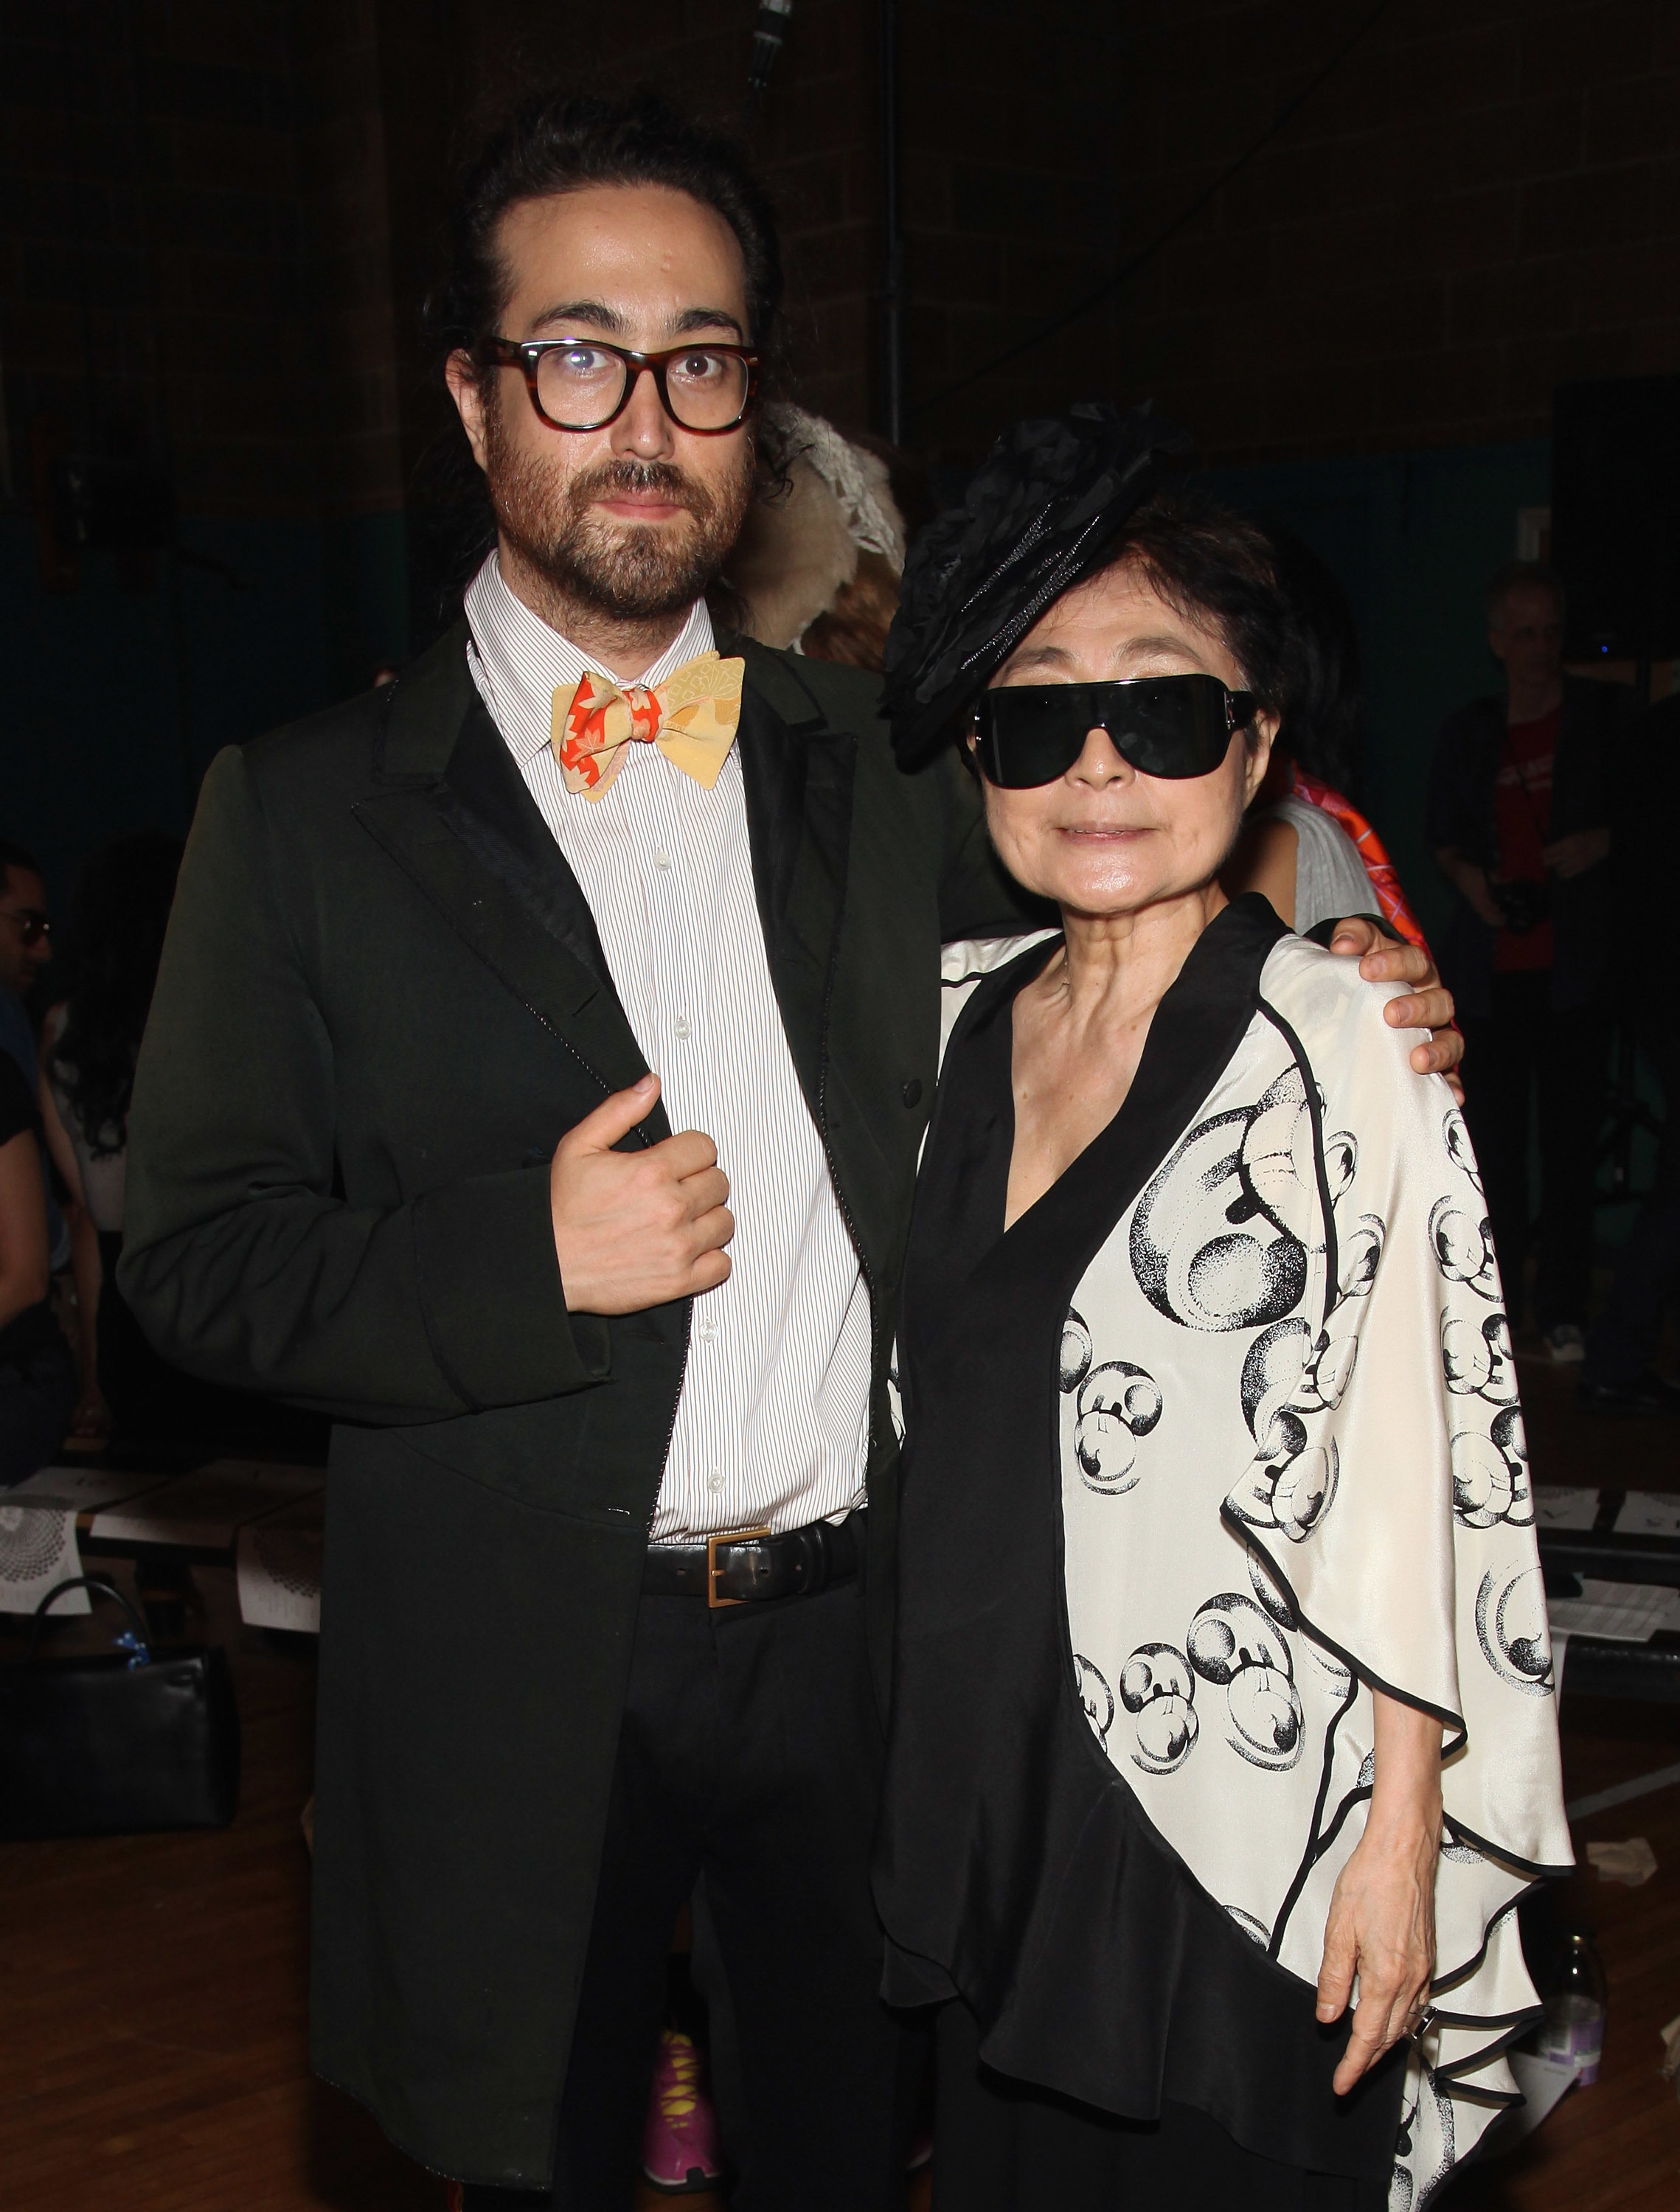 Yoko Ono and son Sean Lennon - Famous mom and son duos | Gallery ...